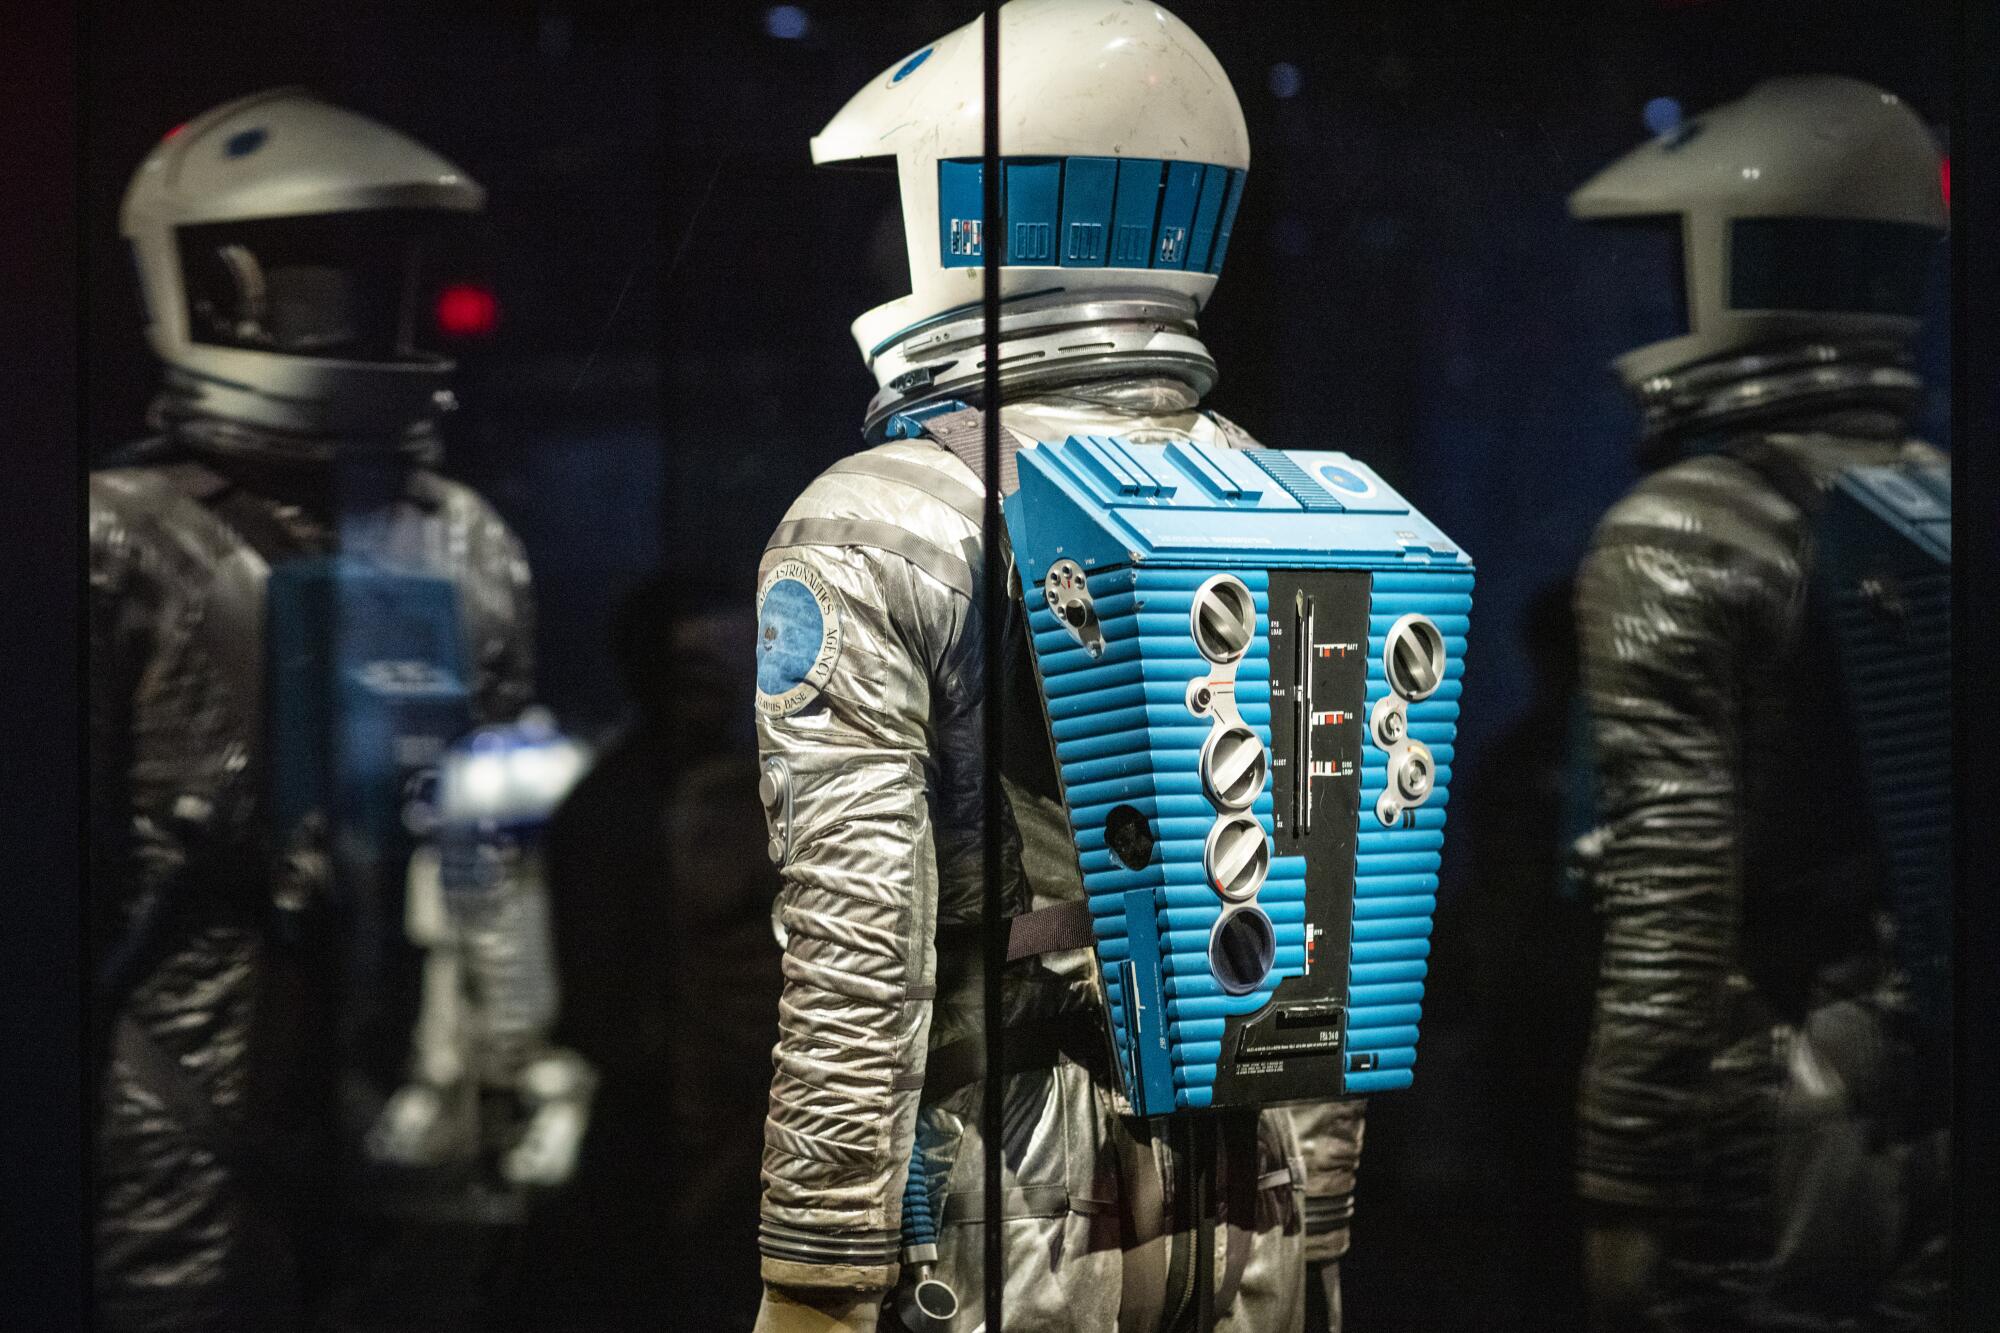 A space suit in a glass case in a museum 